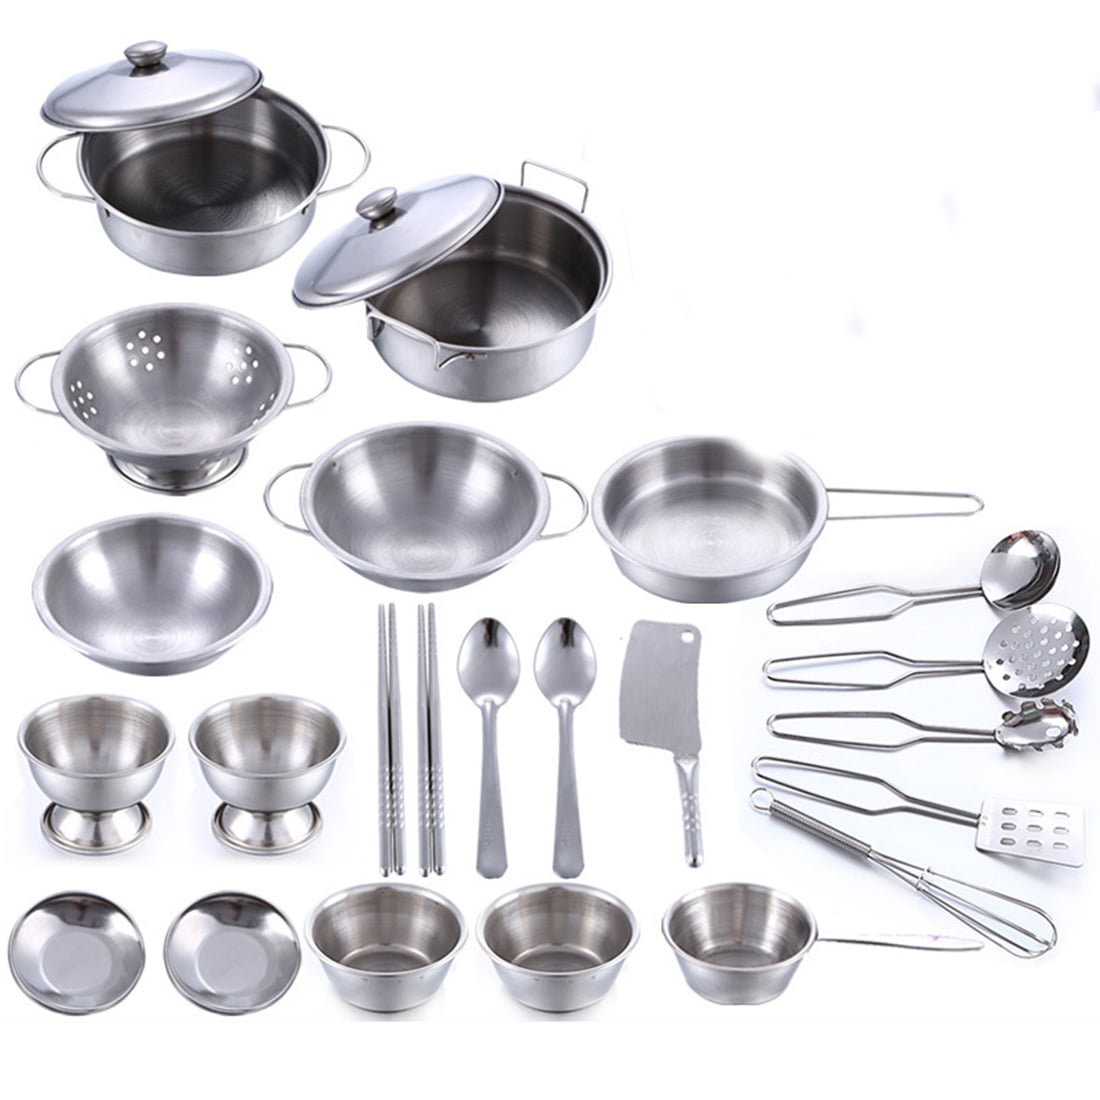 Kids Kitchen Toy Role Play Food Stainless Steel Cooking Utensils Gift 16-25pcs 